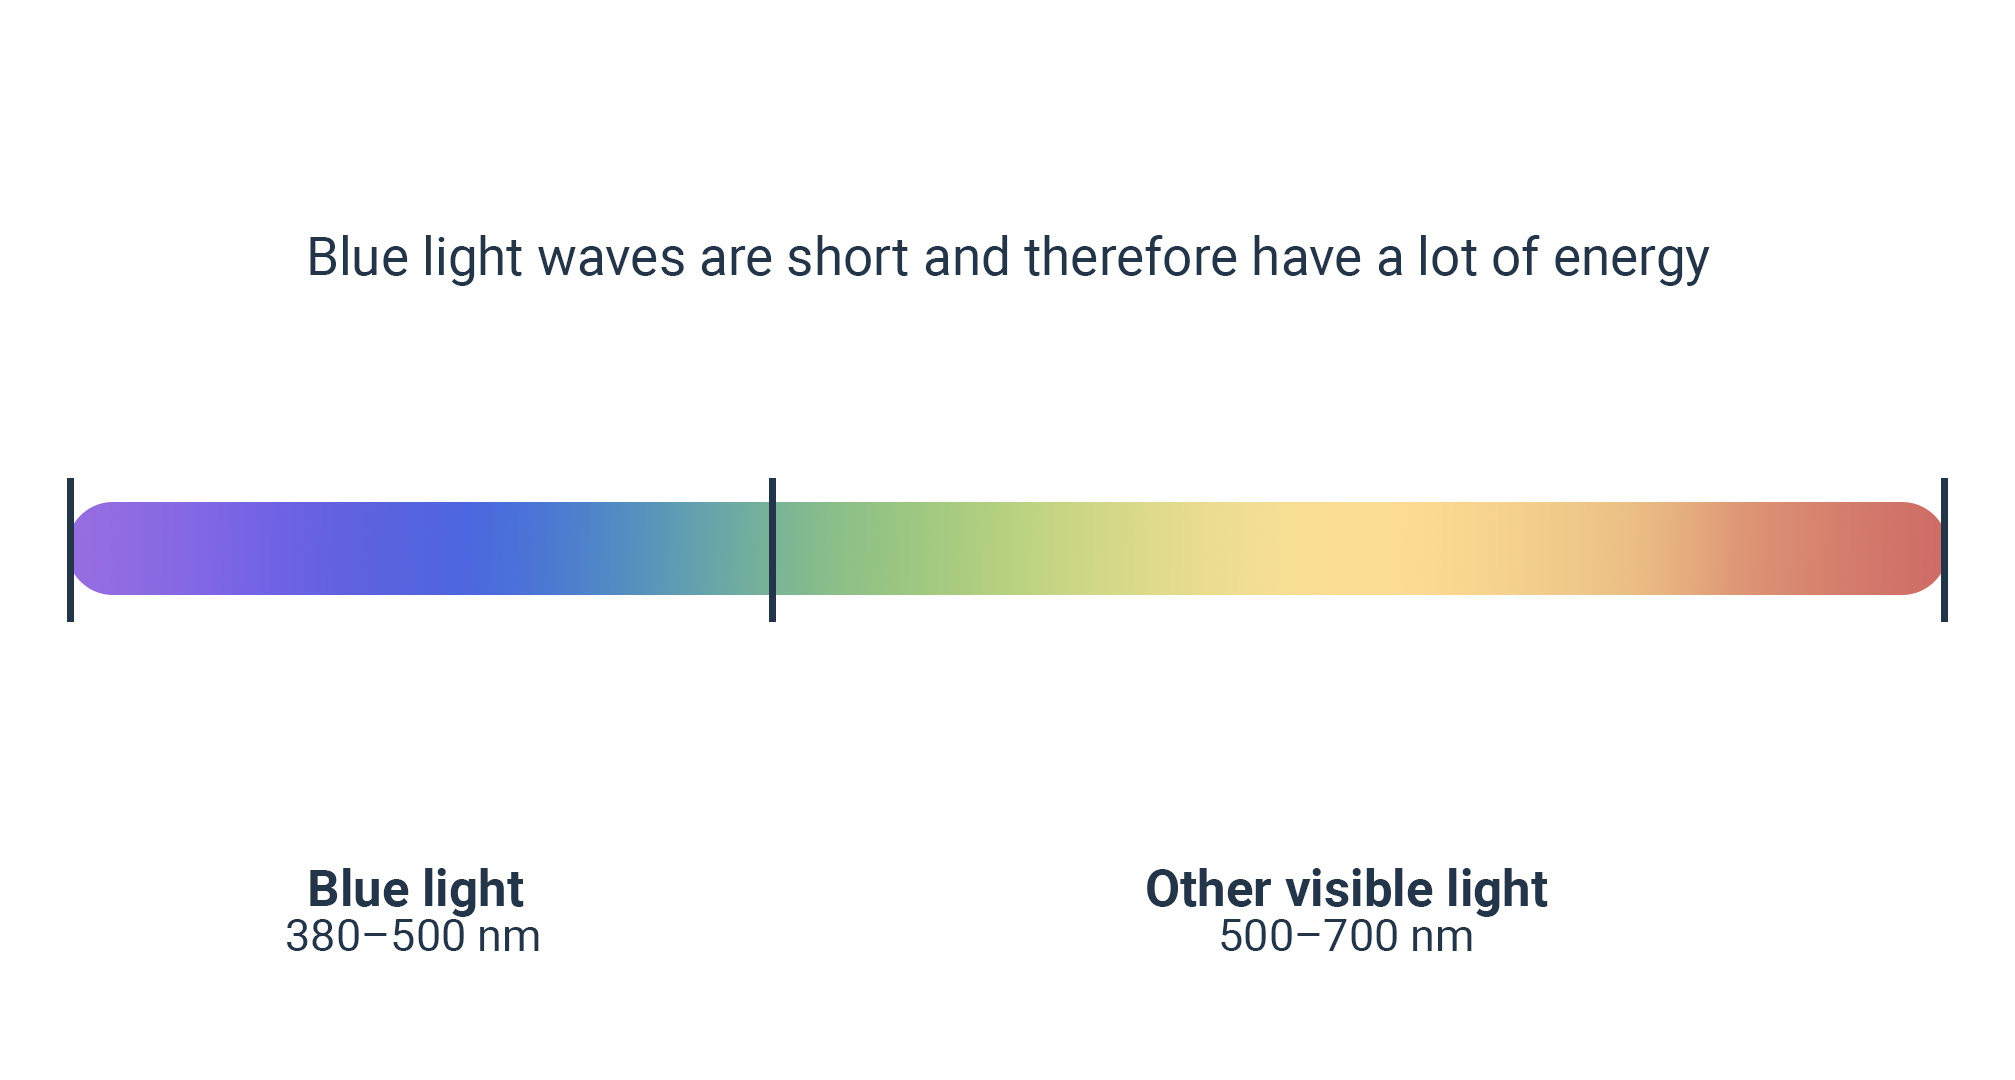 infographic of blue light spectrum illustrating low to high energy light waves